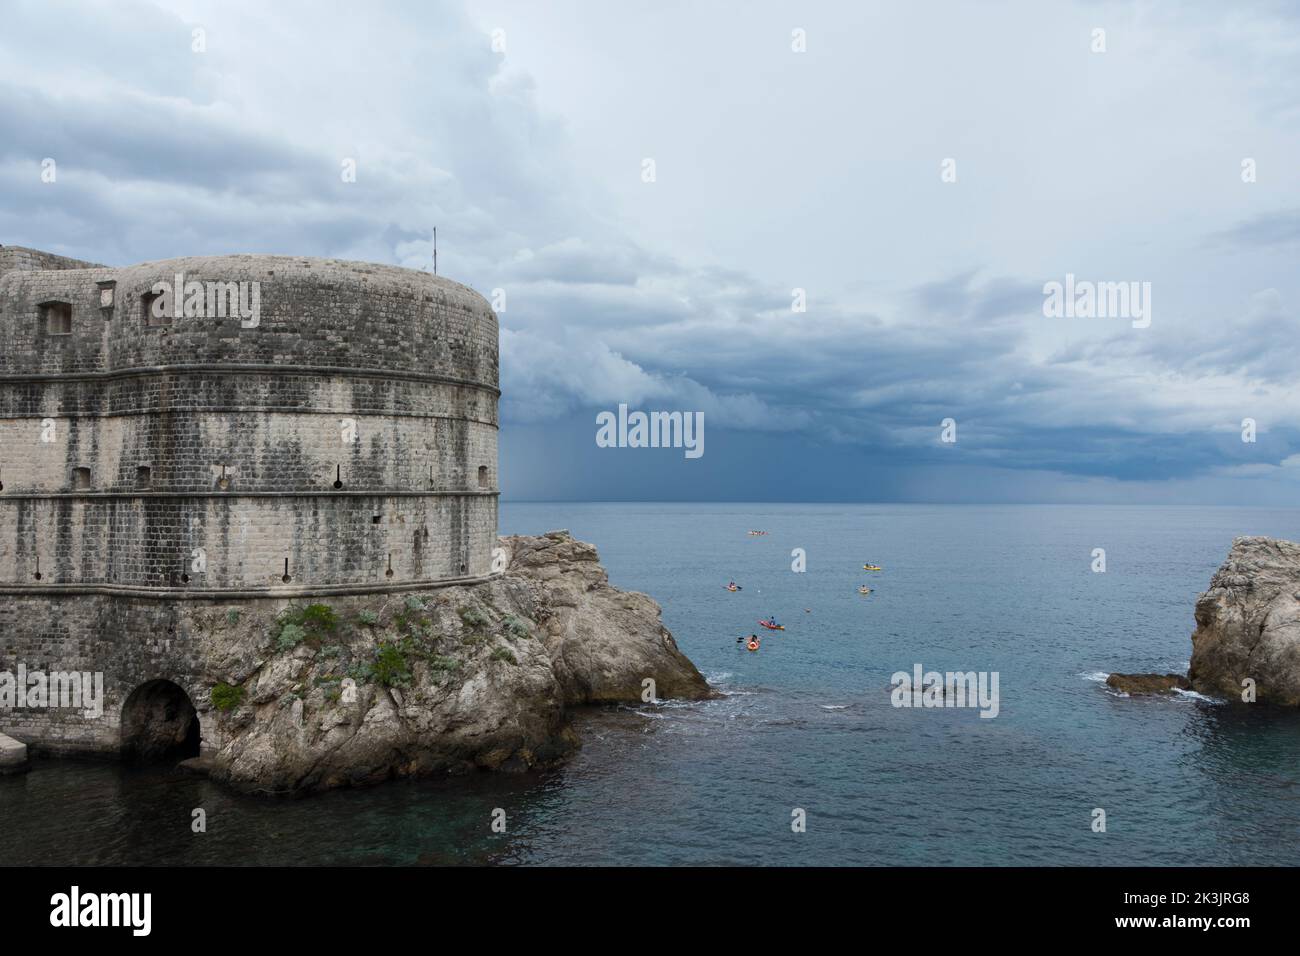 Bokar Fortress seen from West Harbour in Old Town of Dubrovnik with kayakers and rain clouds in the background. Dalmatia, Croatia, Europe. Stock Photo